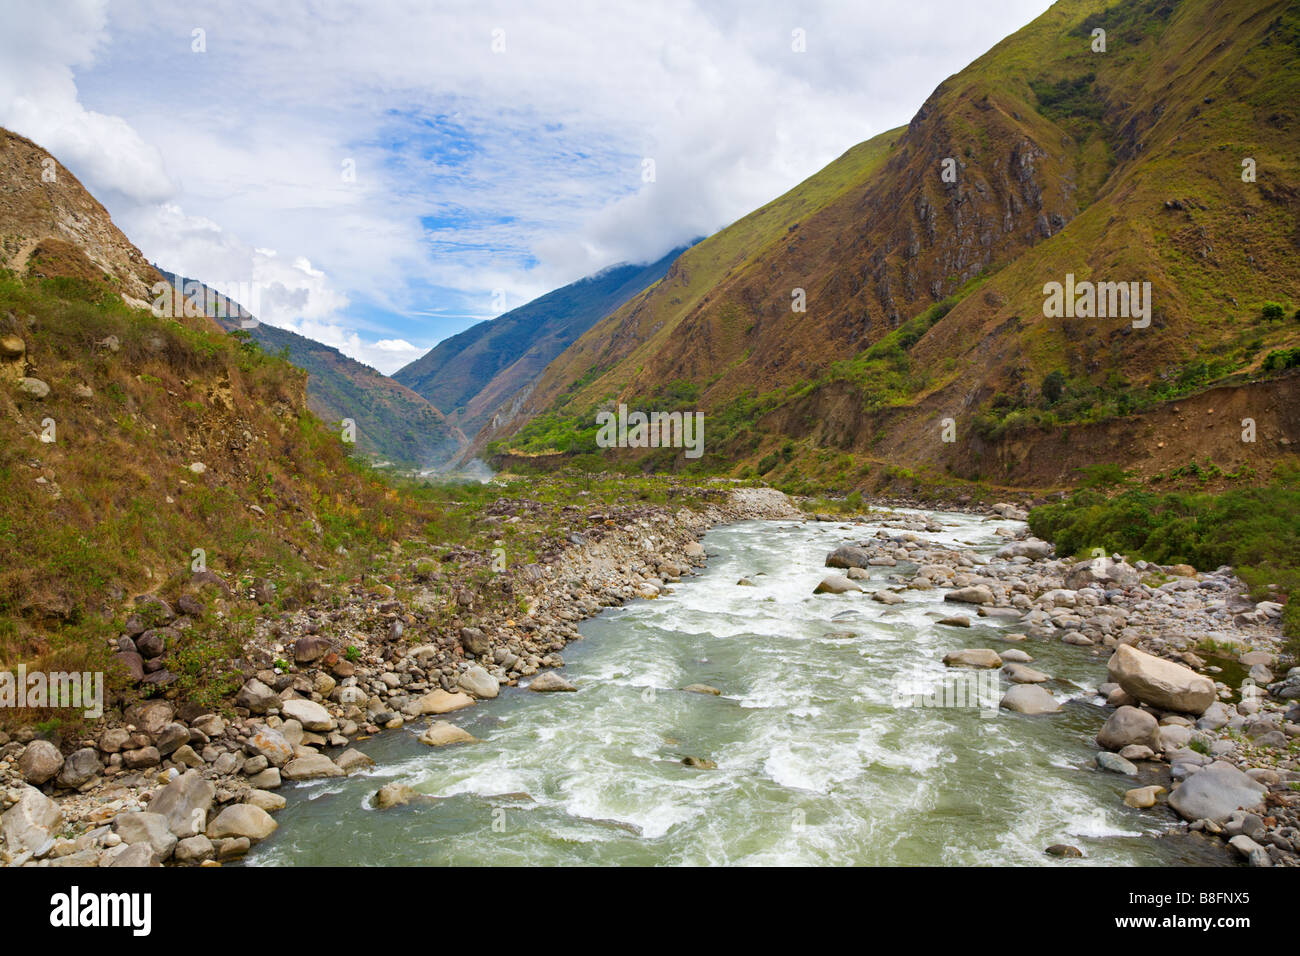 River in Andean Mountains Stock Photo